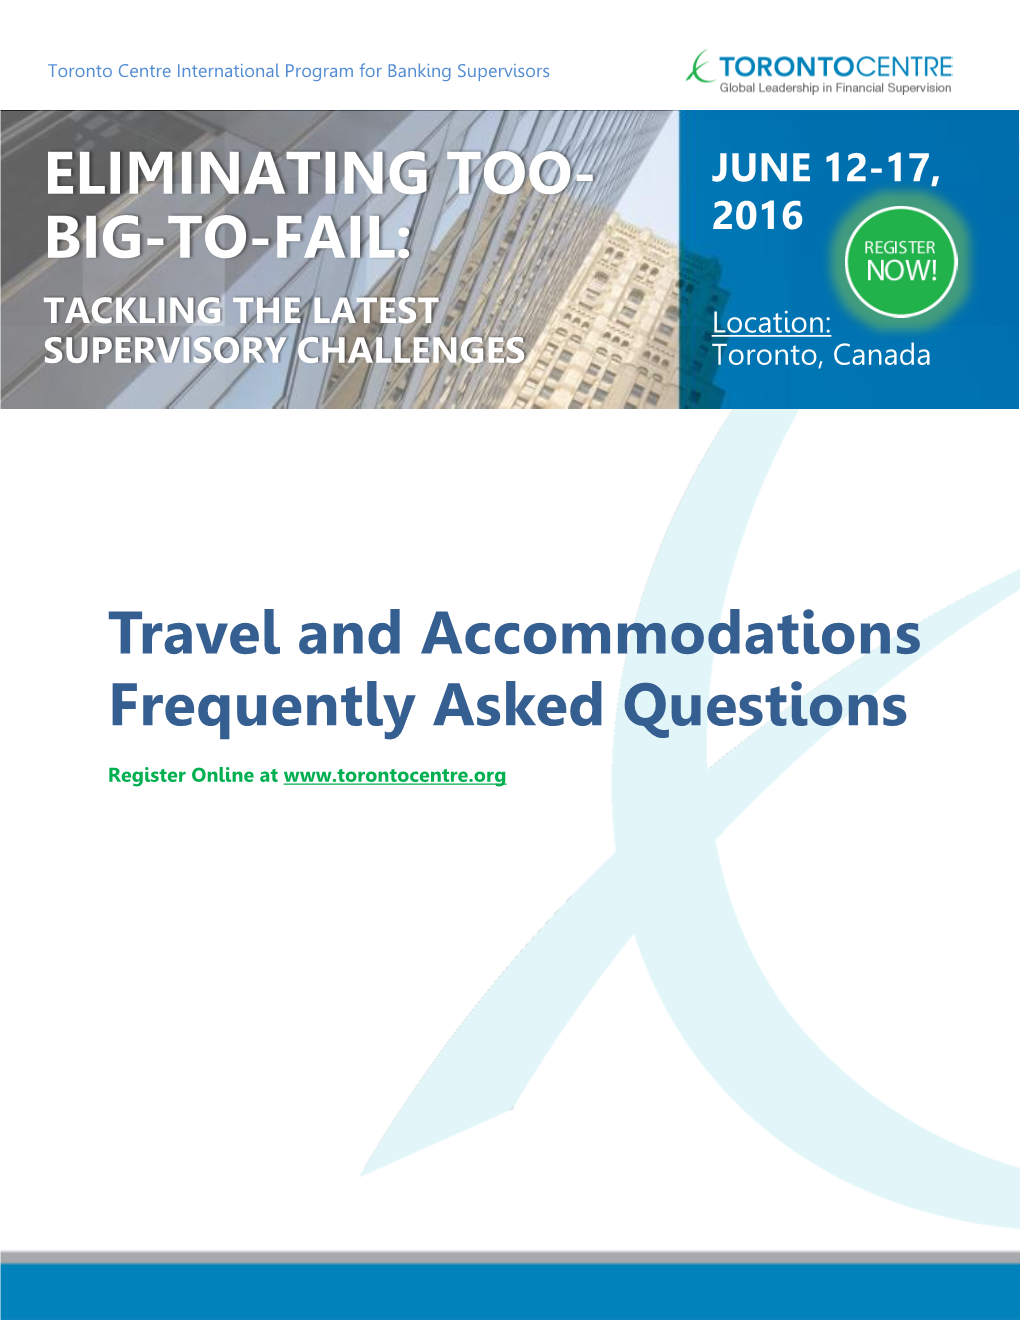 Travel and Accommodations Frequently Asked Questions